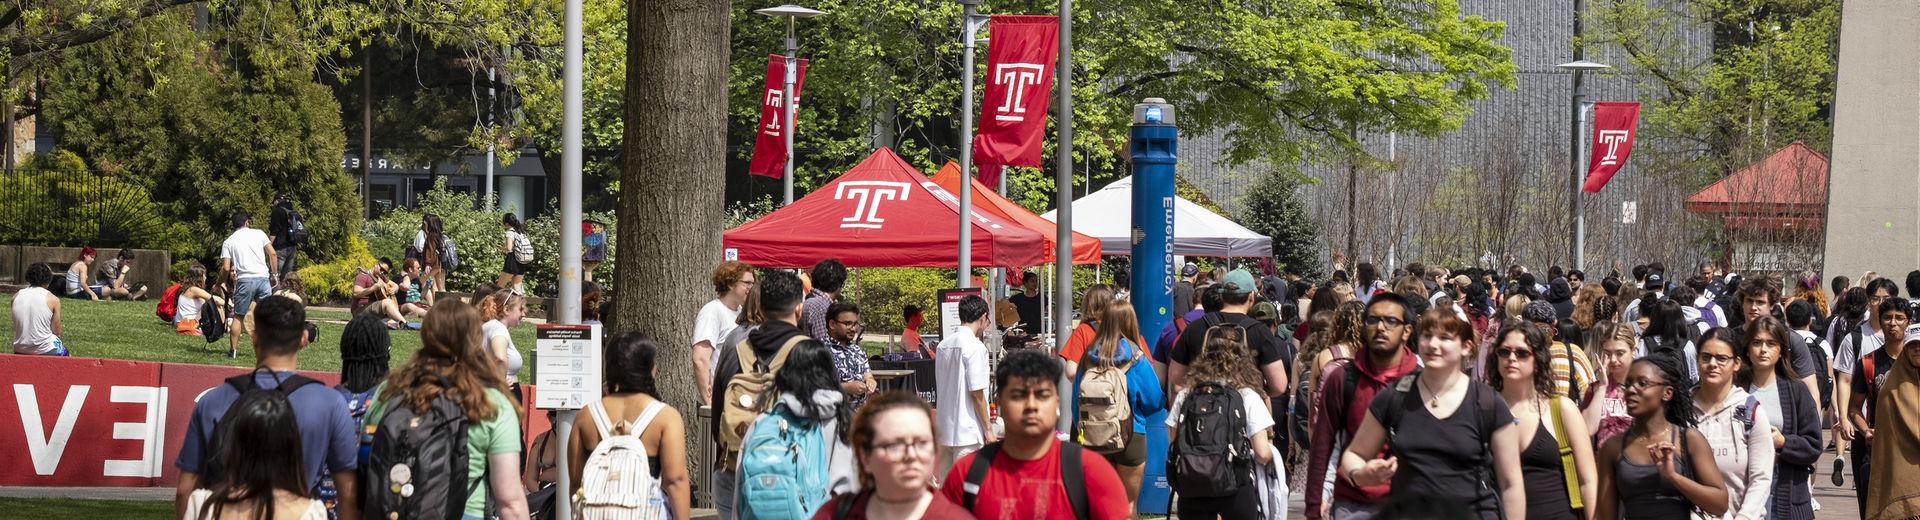 Students traveling on Temple's Main Campus on a sunny spring day